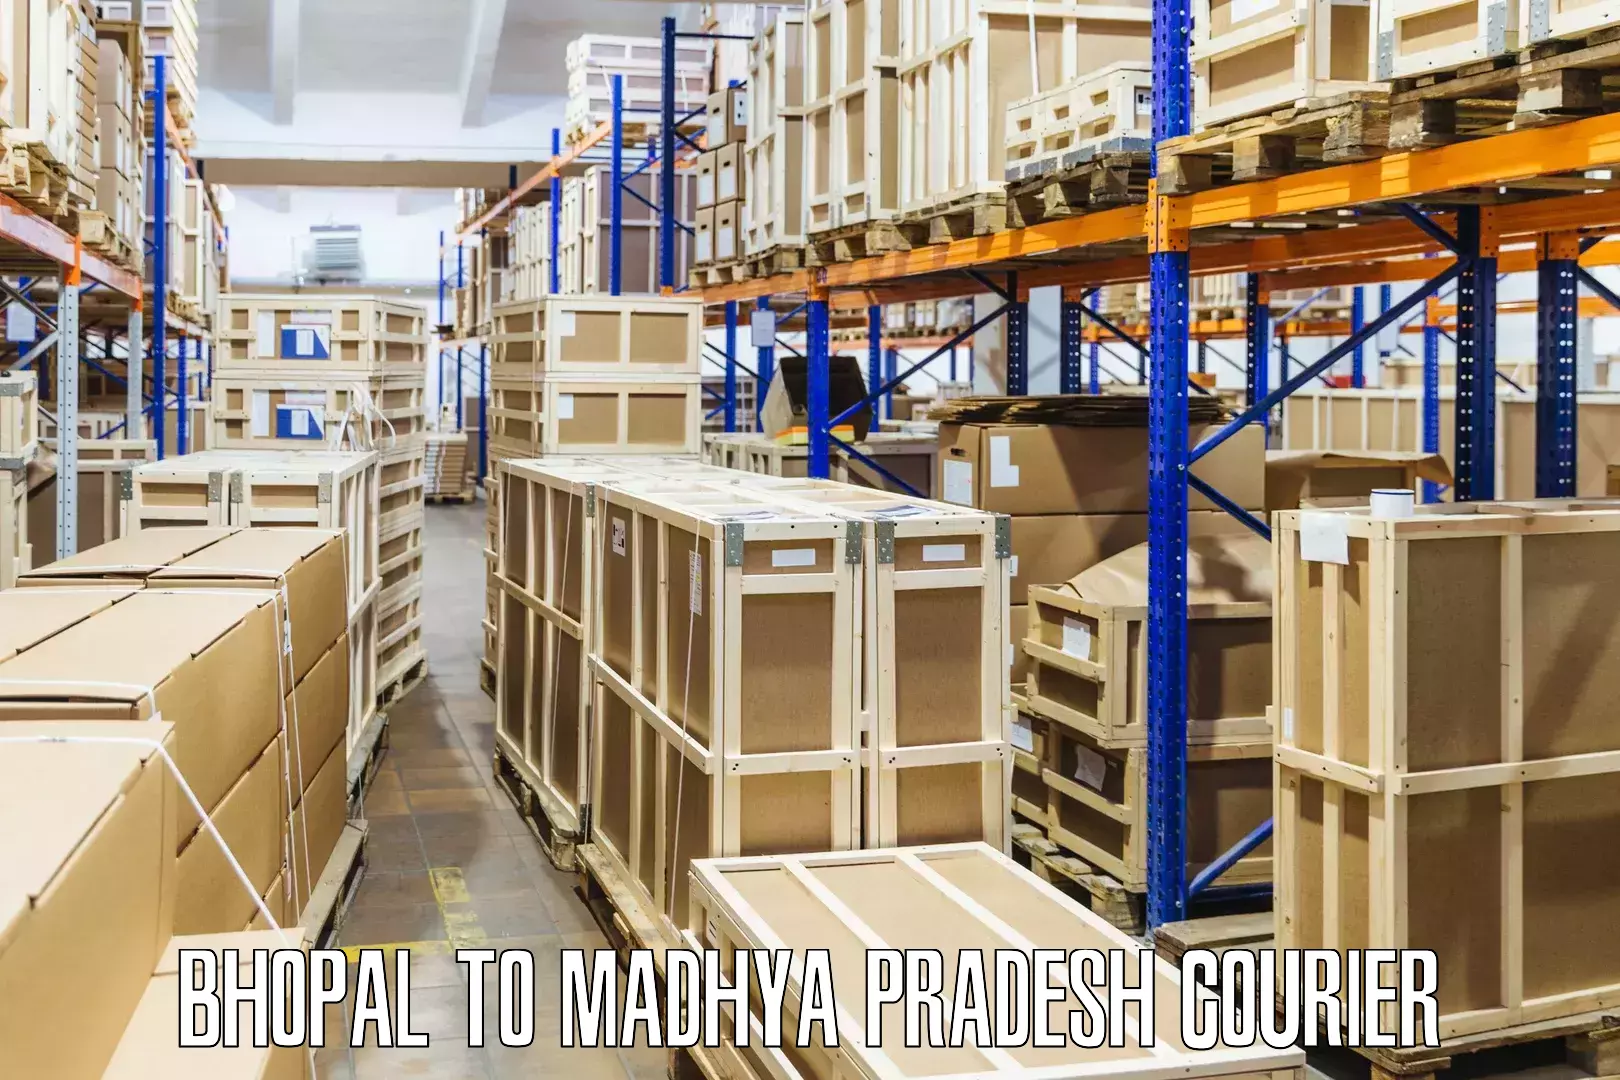 Customized shipping options Bhopal to Alirajpur